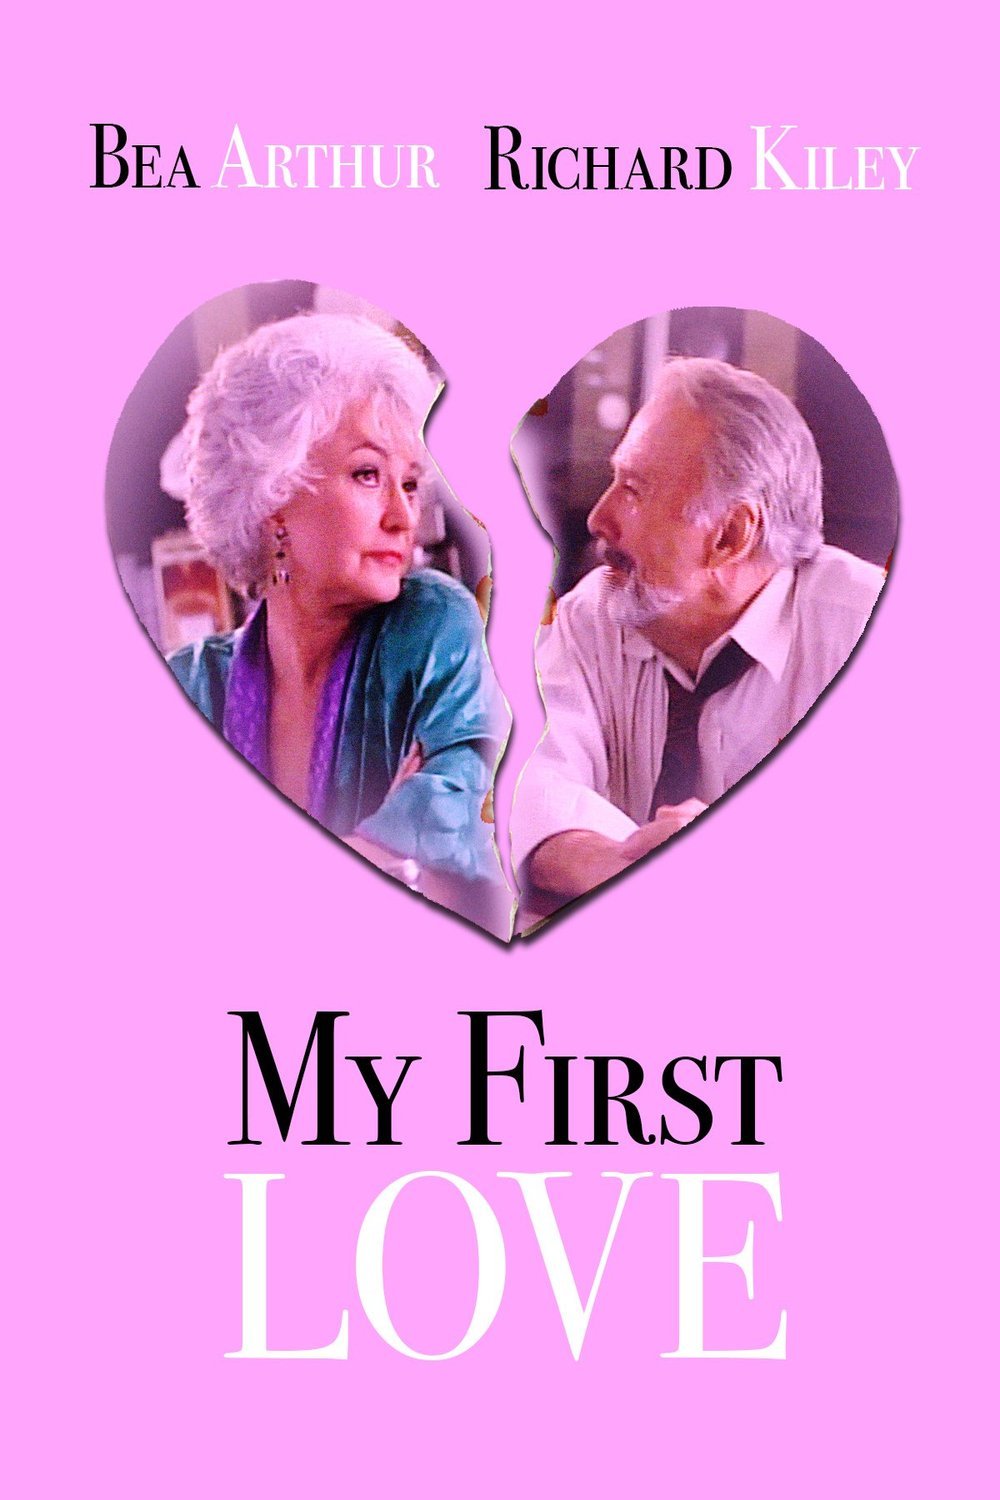 Poster of the movie My First Love